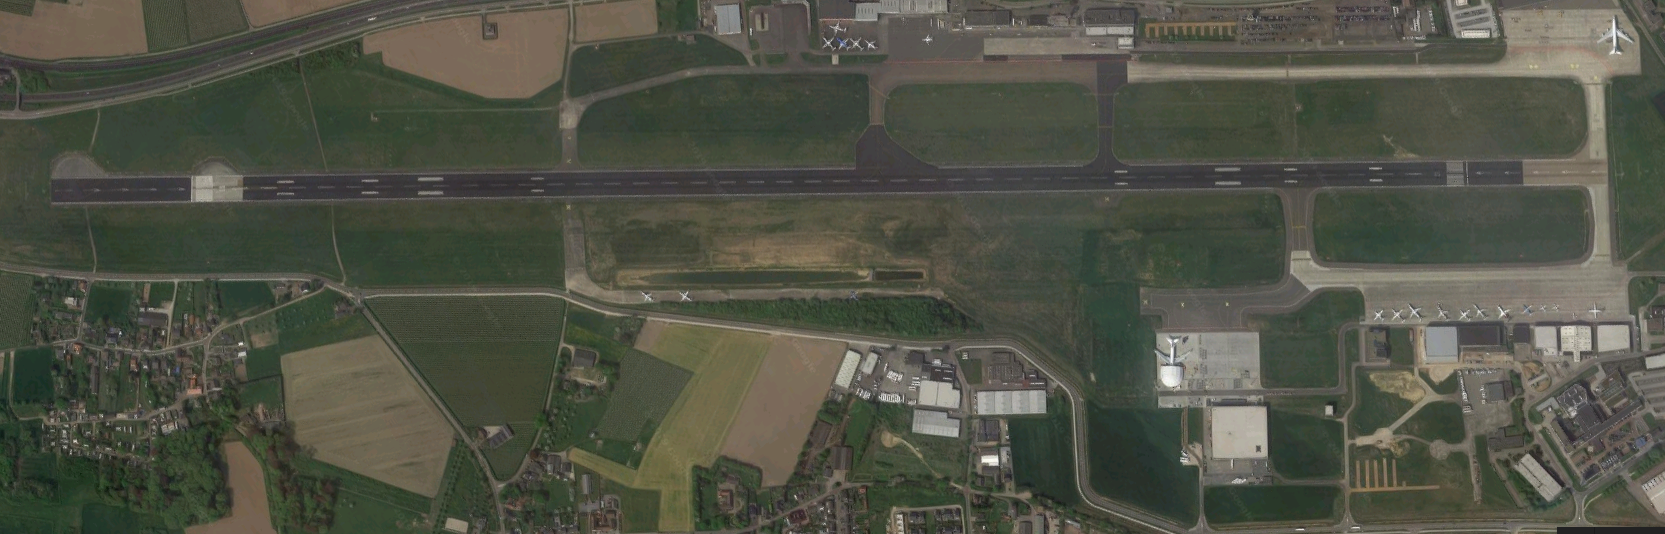 File:Maastricht airport.png